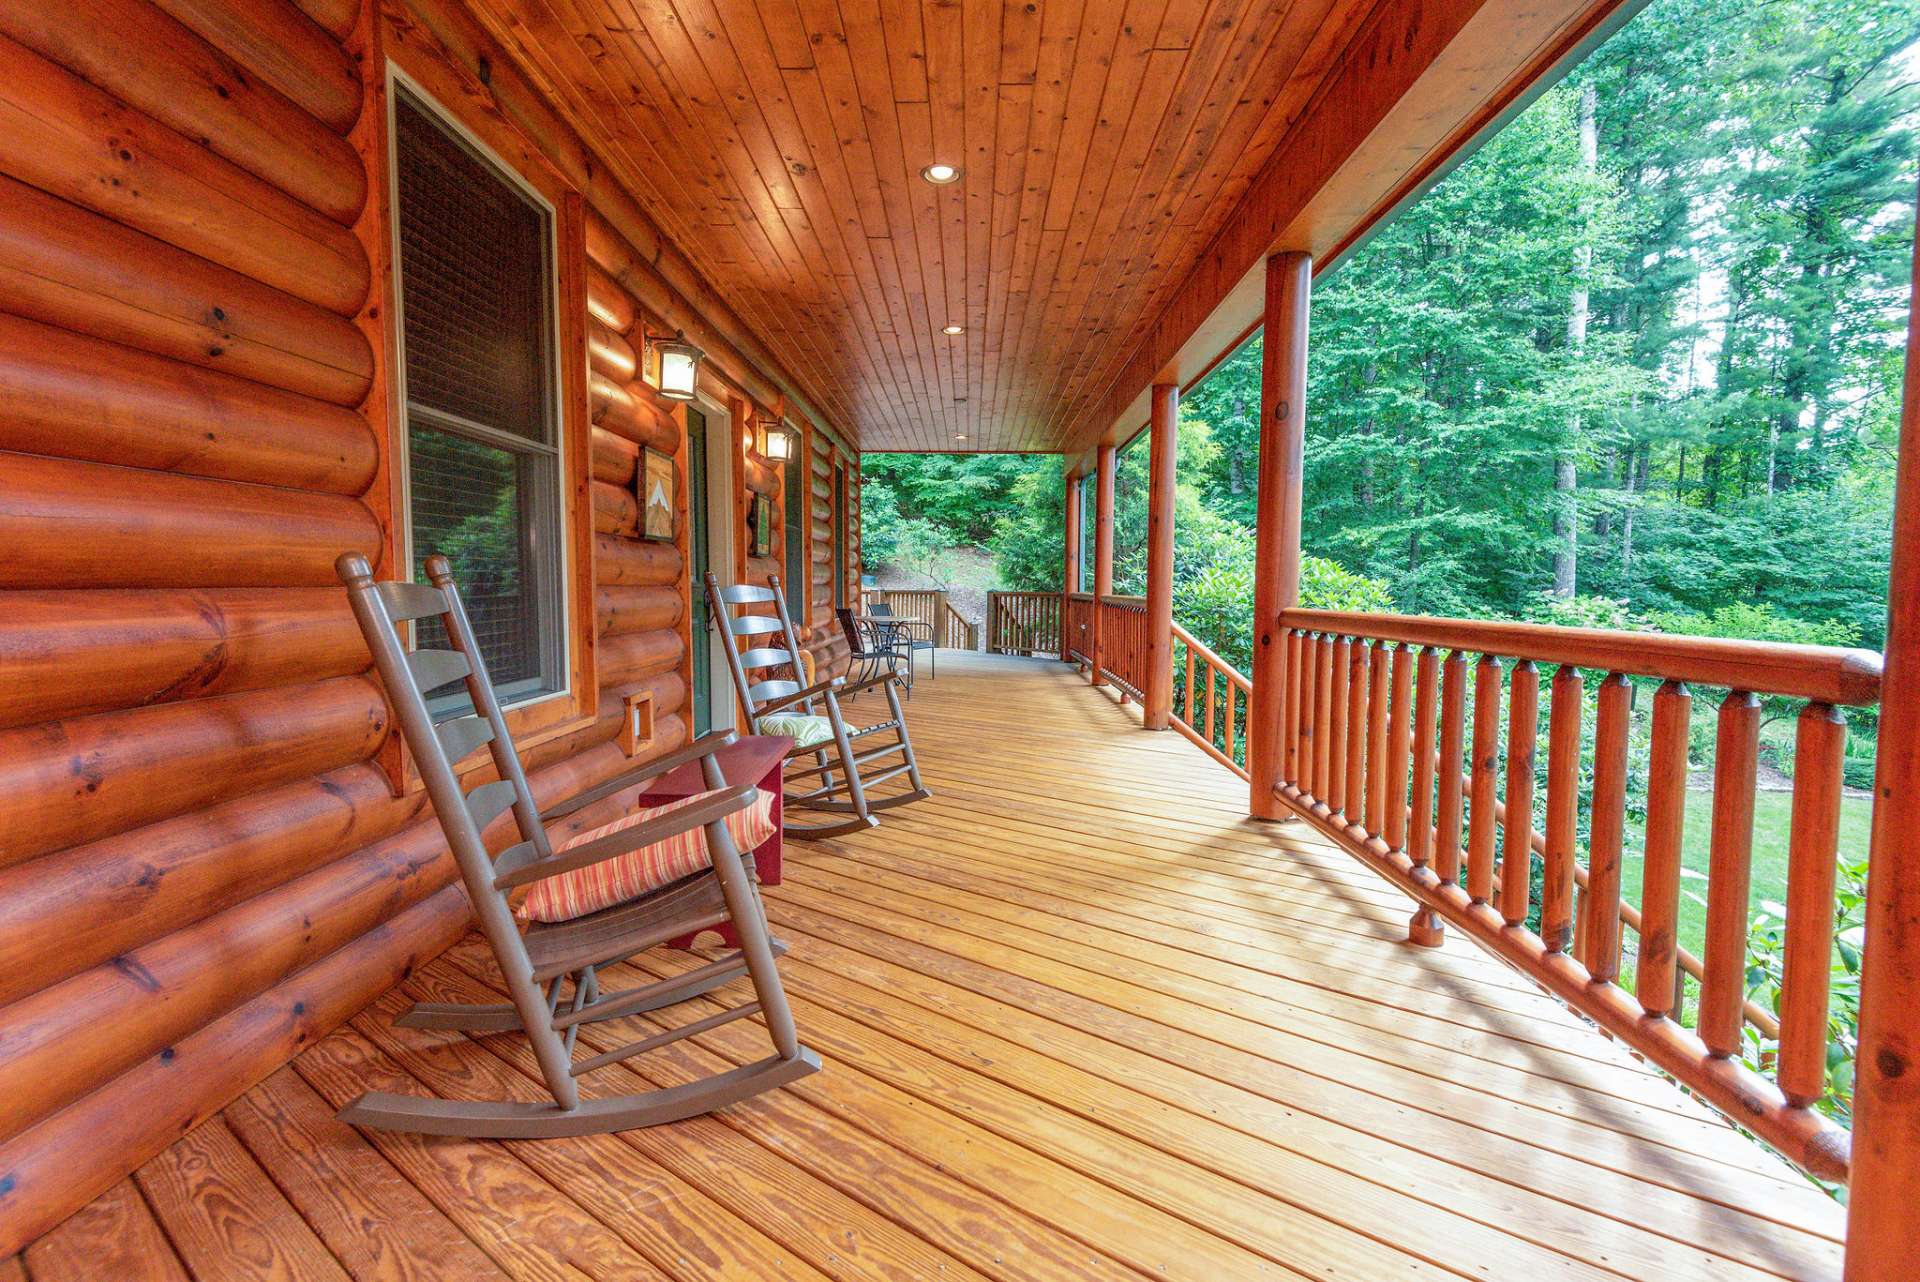 A covered front porch welcomes you and guests to relax with the sounds of Nature and fresh mountain air.